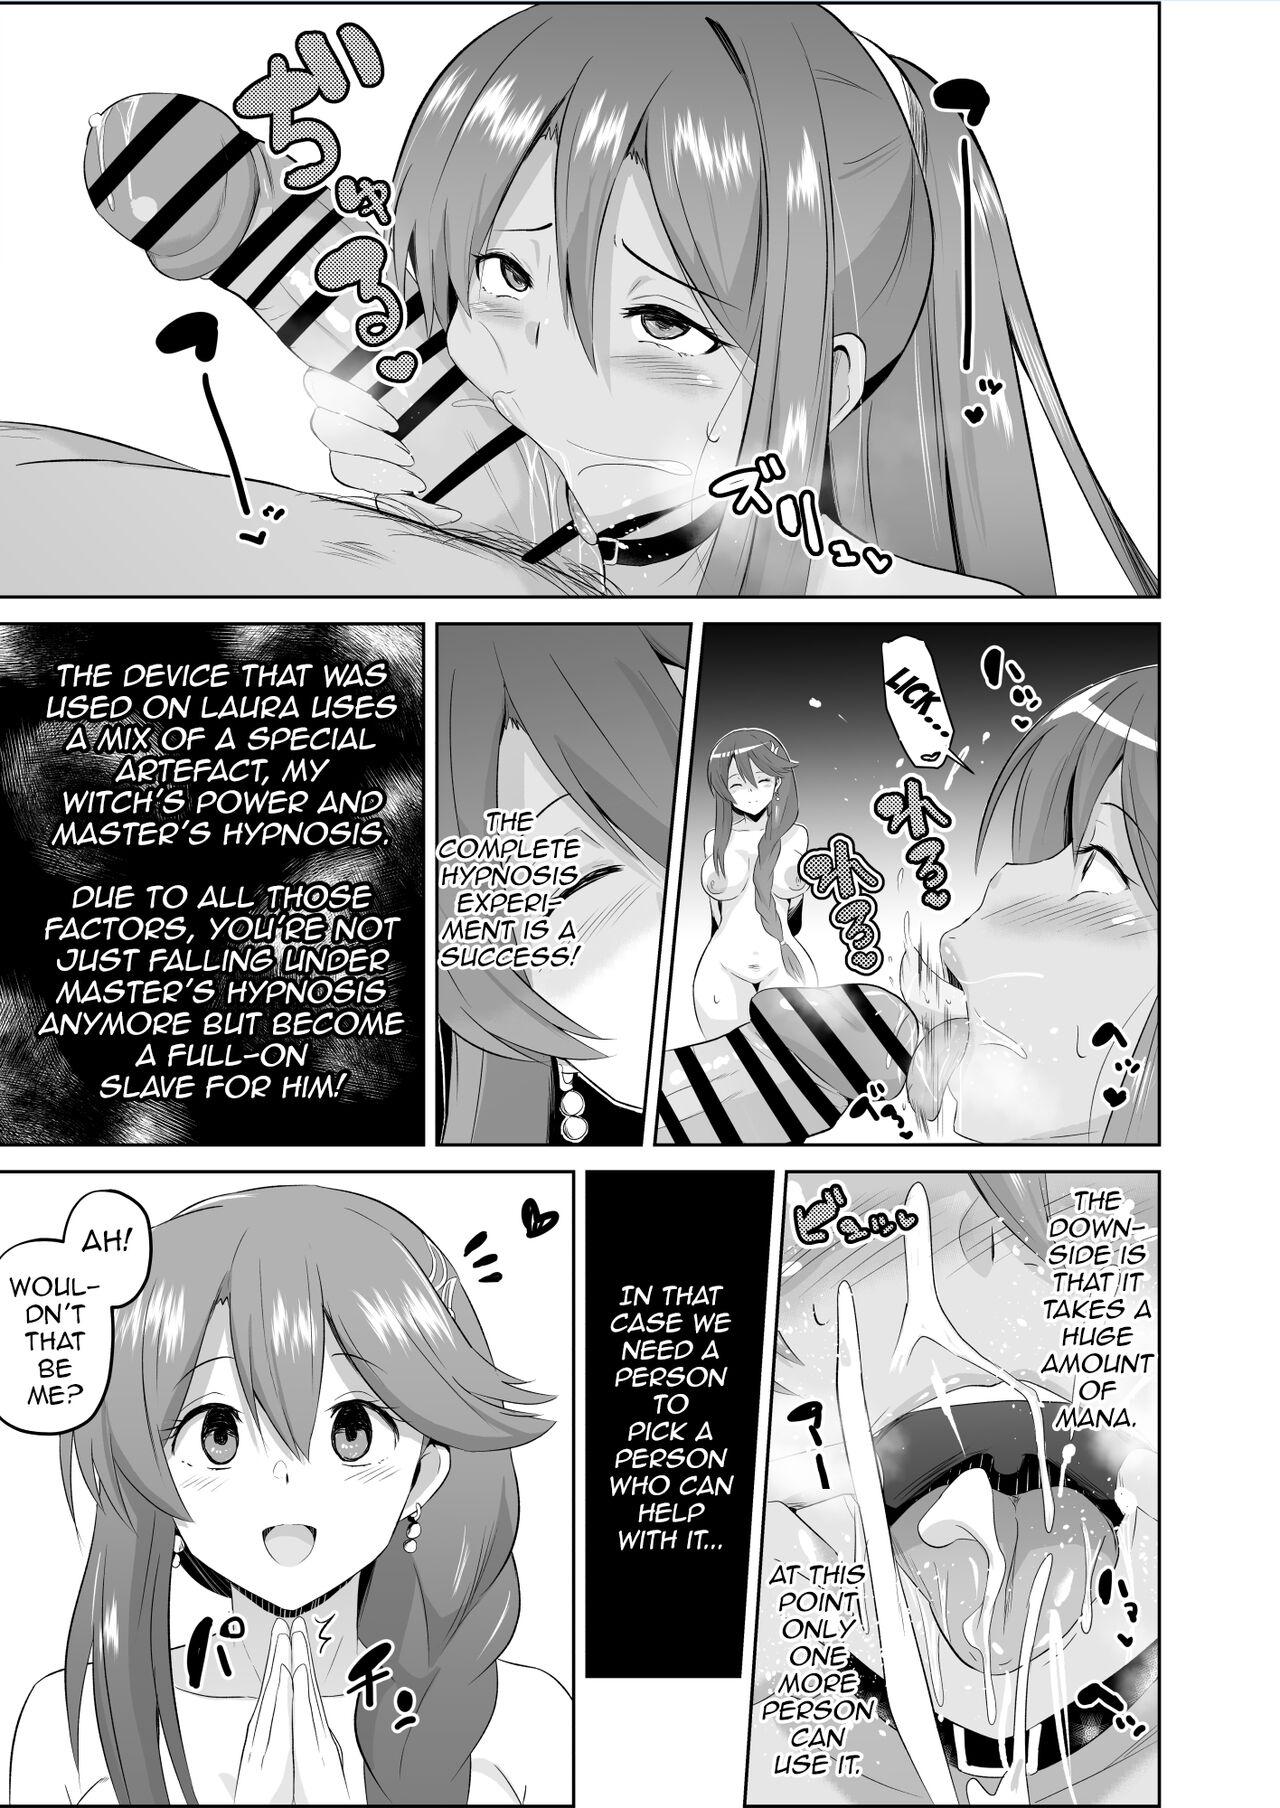 Jerking Off NTR Hypnotic Academy - Chapter 7 - The legend of heroes | eiyuu densetsu 3some - Page 4